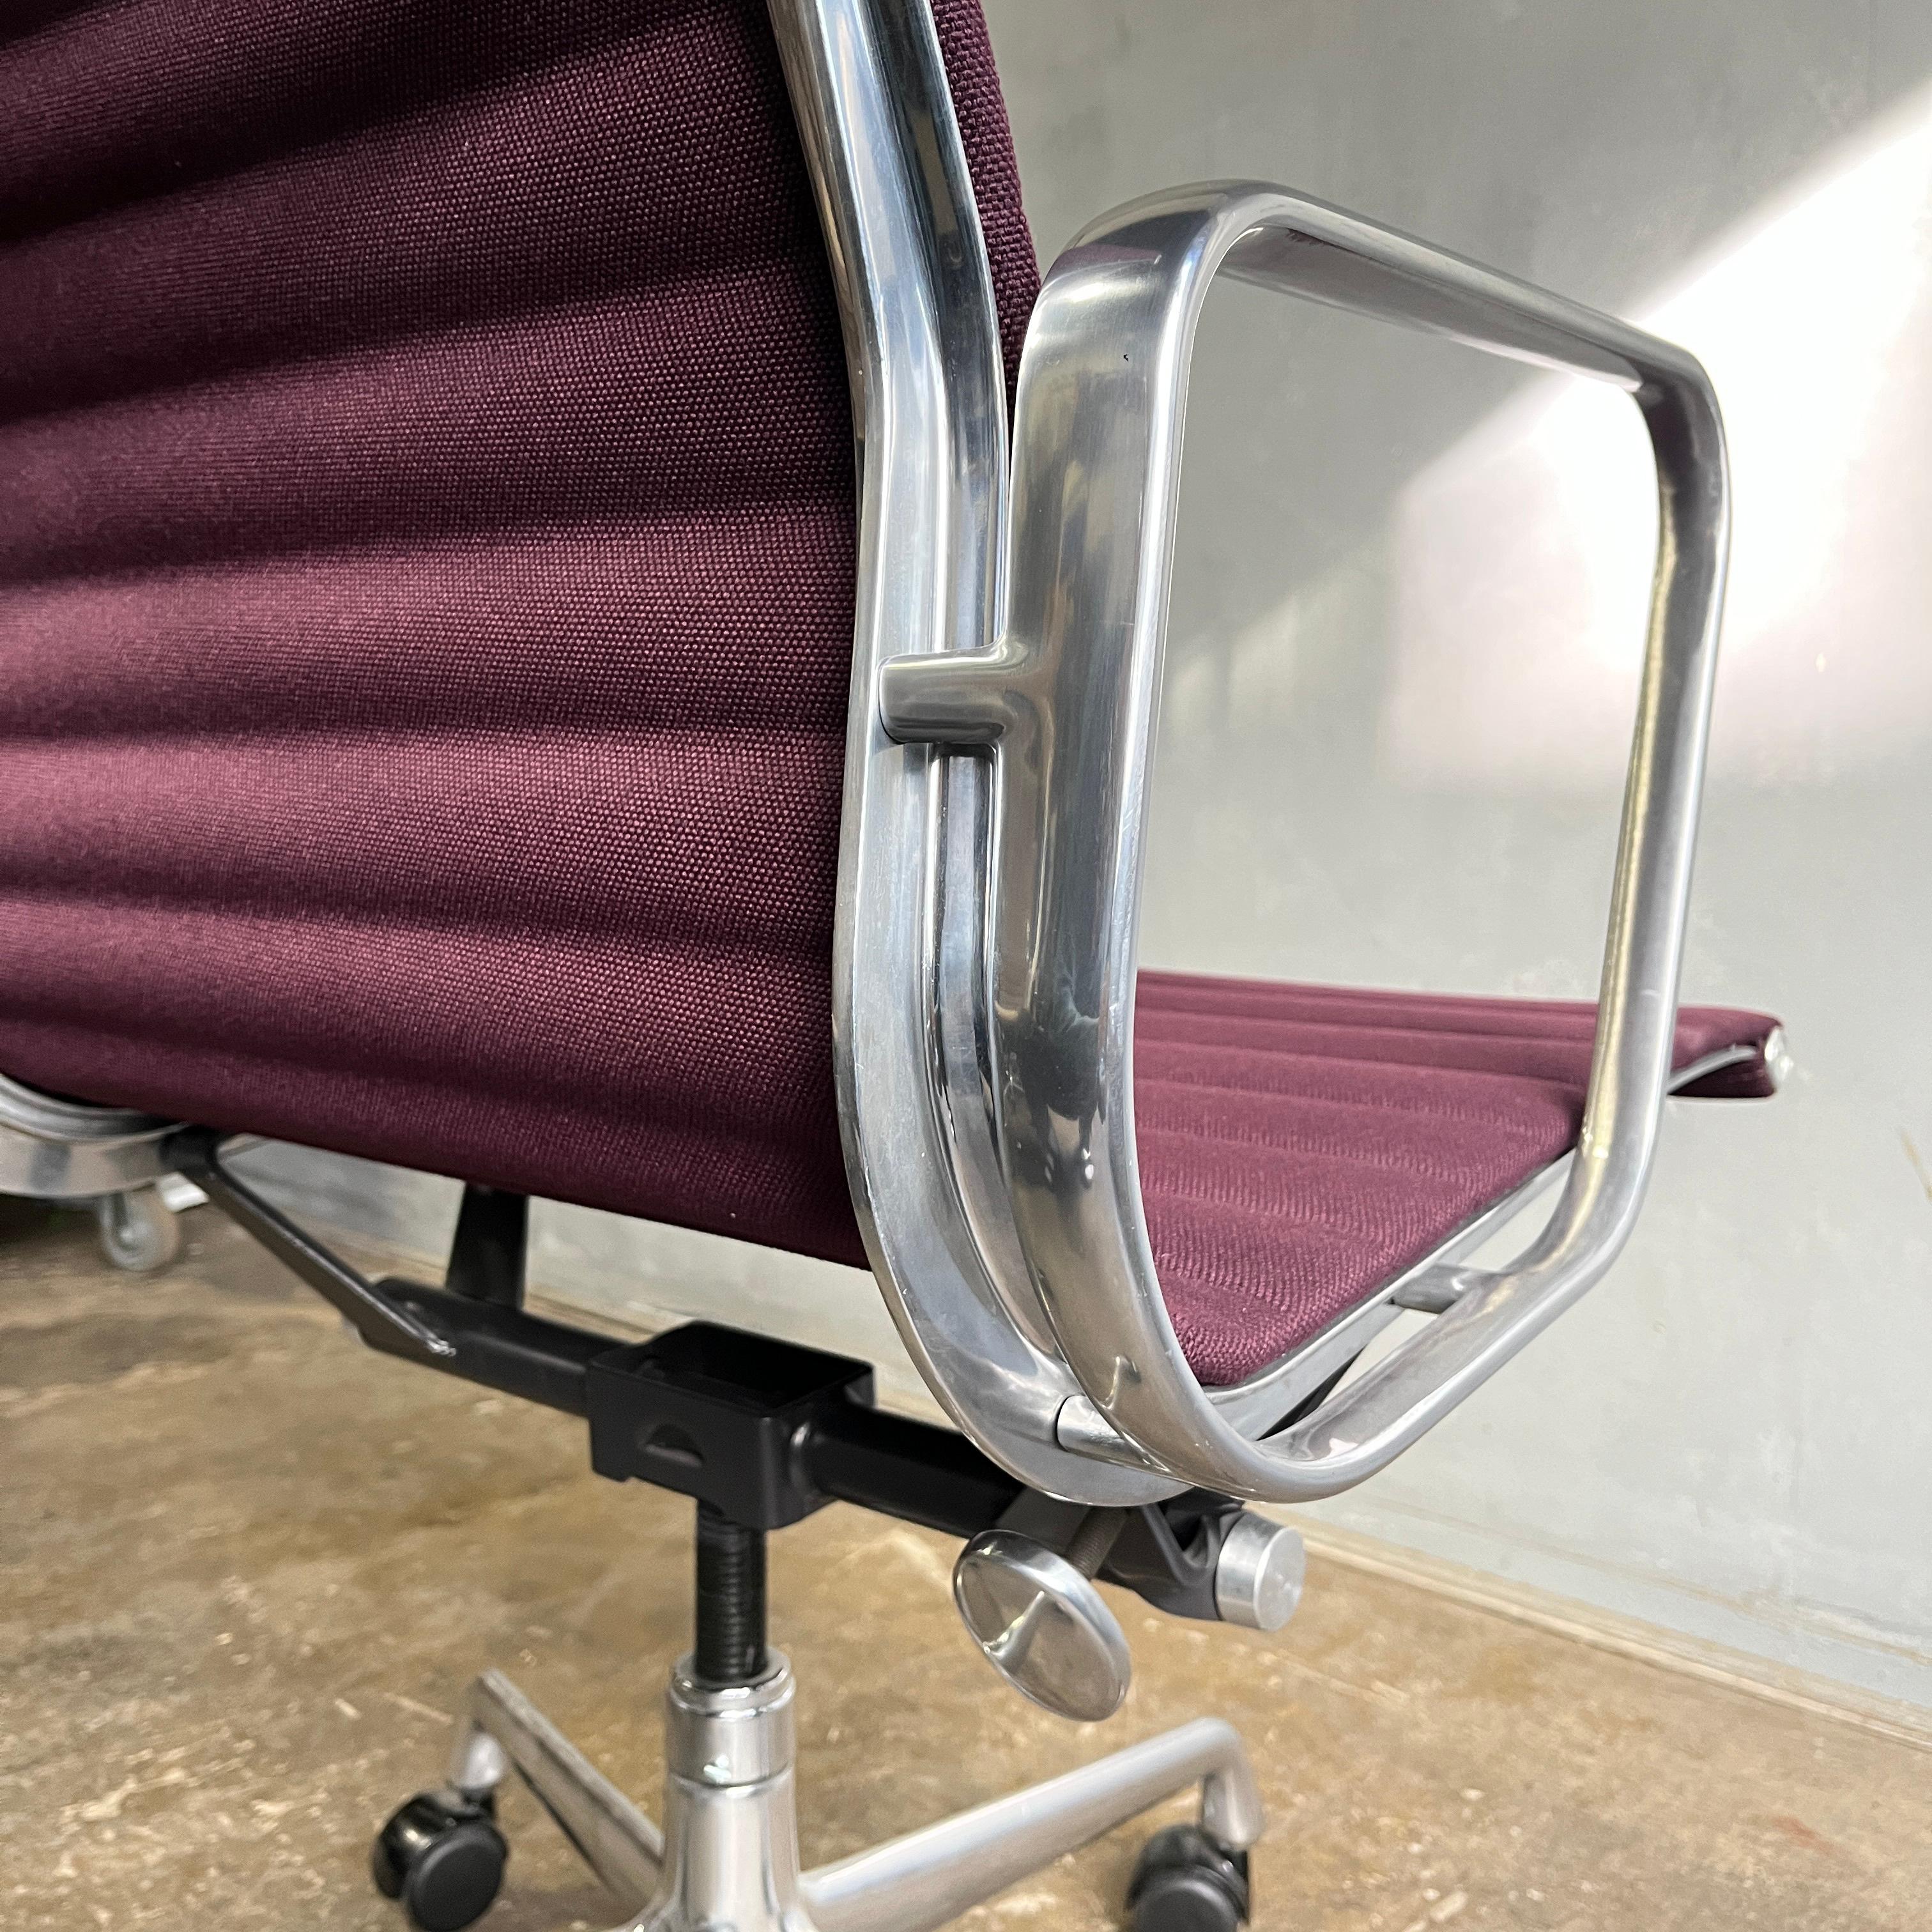 For your consideration are a set of 4 Eames side chairs upholstered in gorgeous purple fabric. Elegance and comfort separates this iconic chair from the rest. The upholstery is in wonderful condition with the arms having some minor scuffs and dings